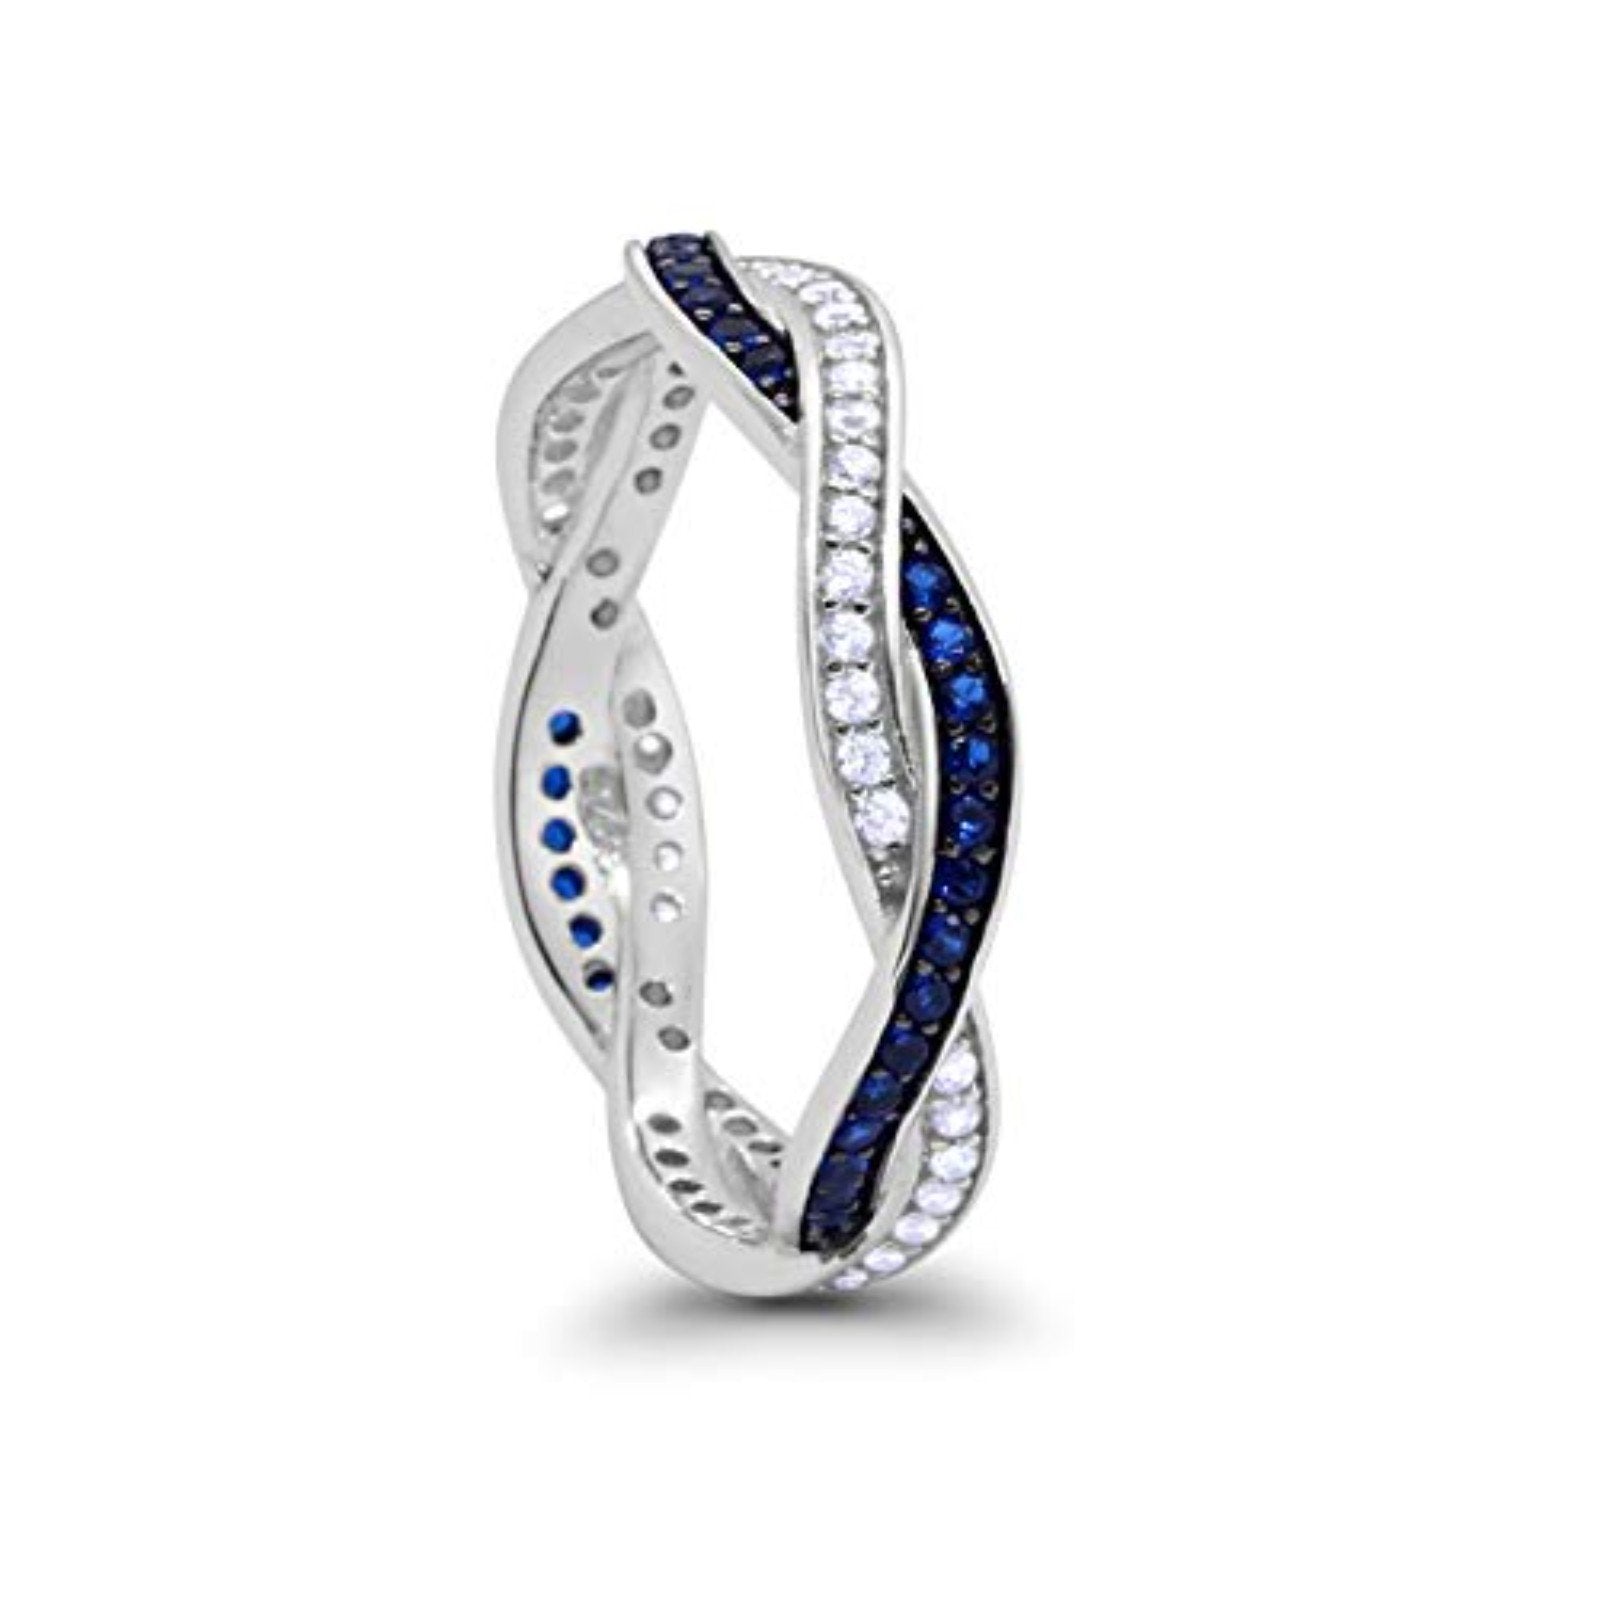 Crisscross Braided Weave Design Band Ring Round Eternity Simulated Blue Sapphire CZ 925 Sterling Silver